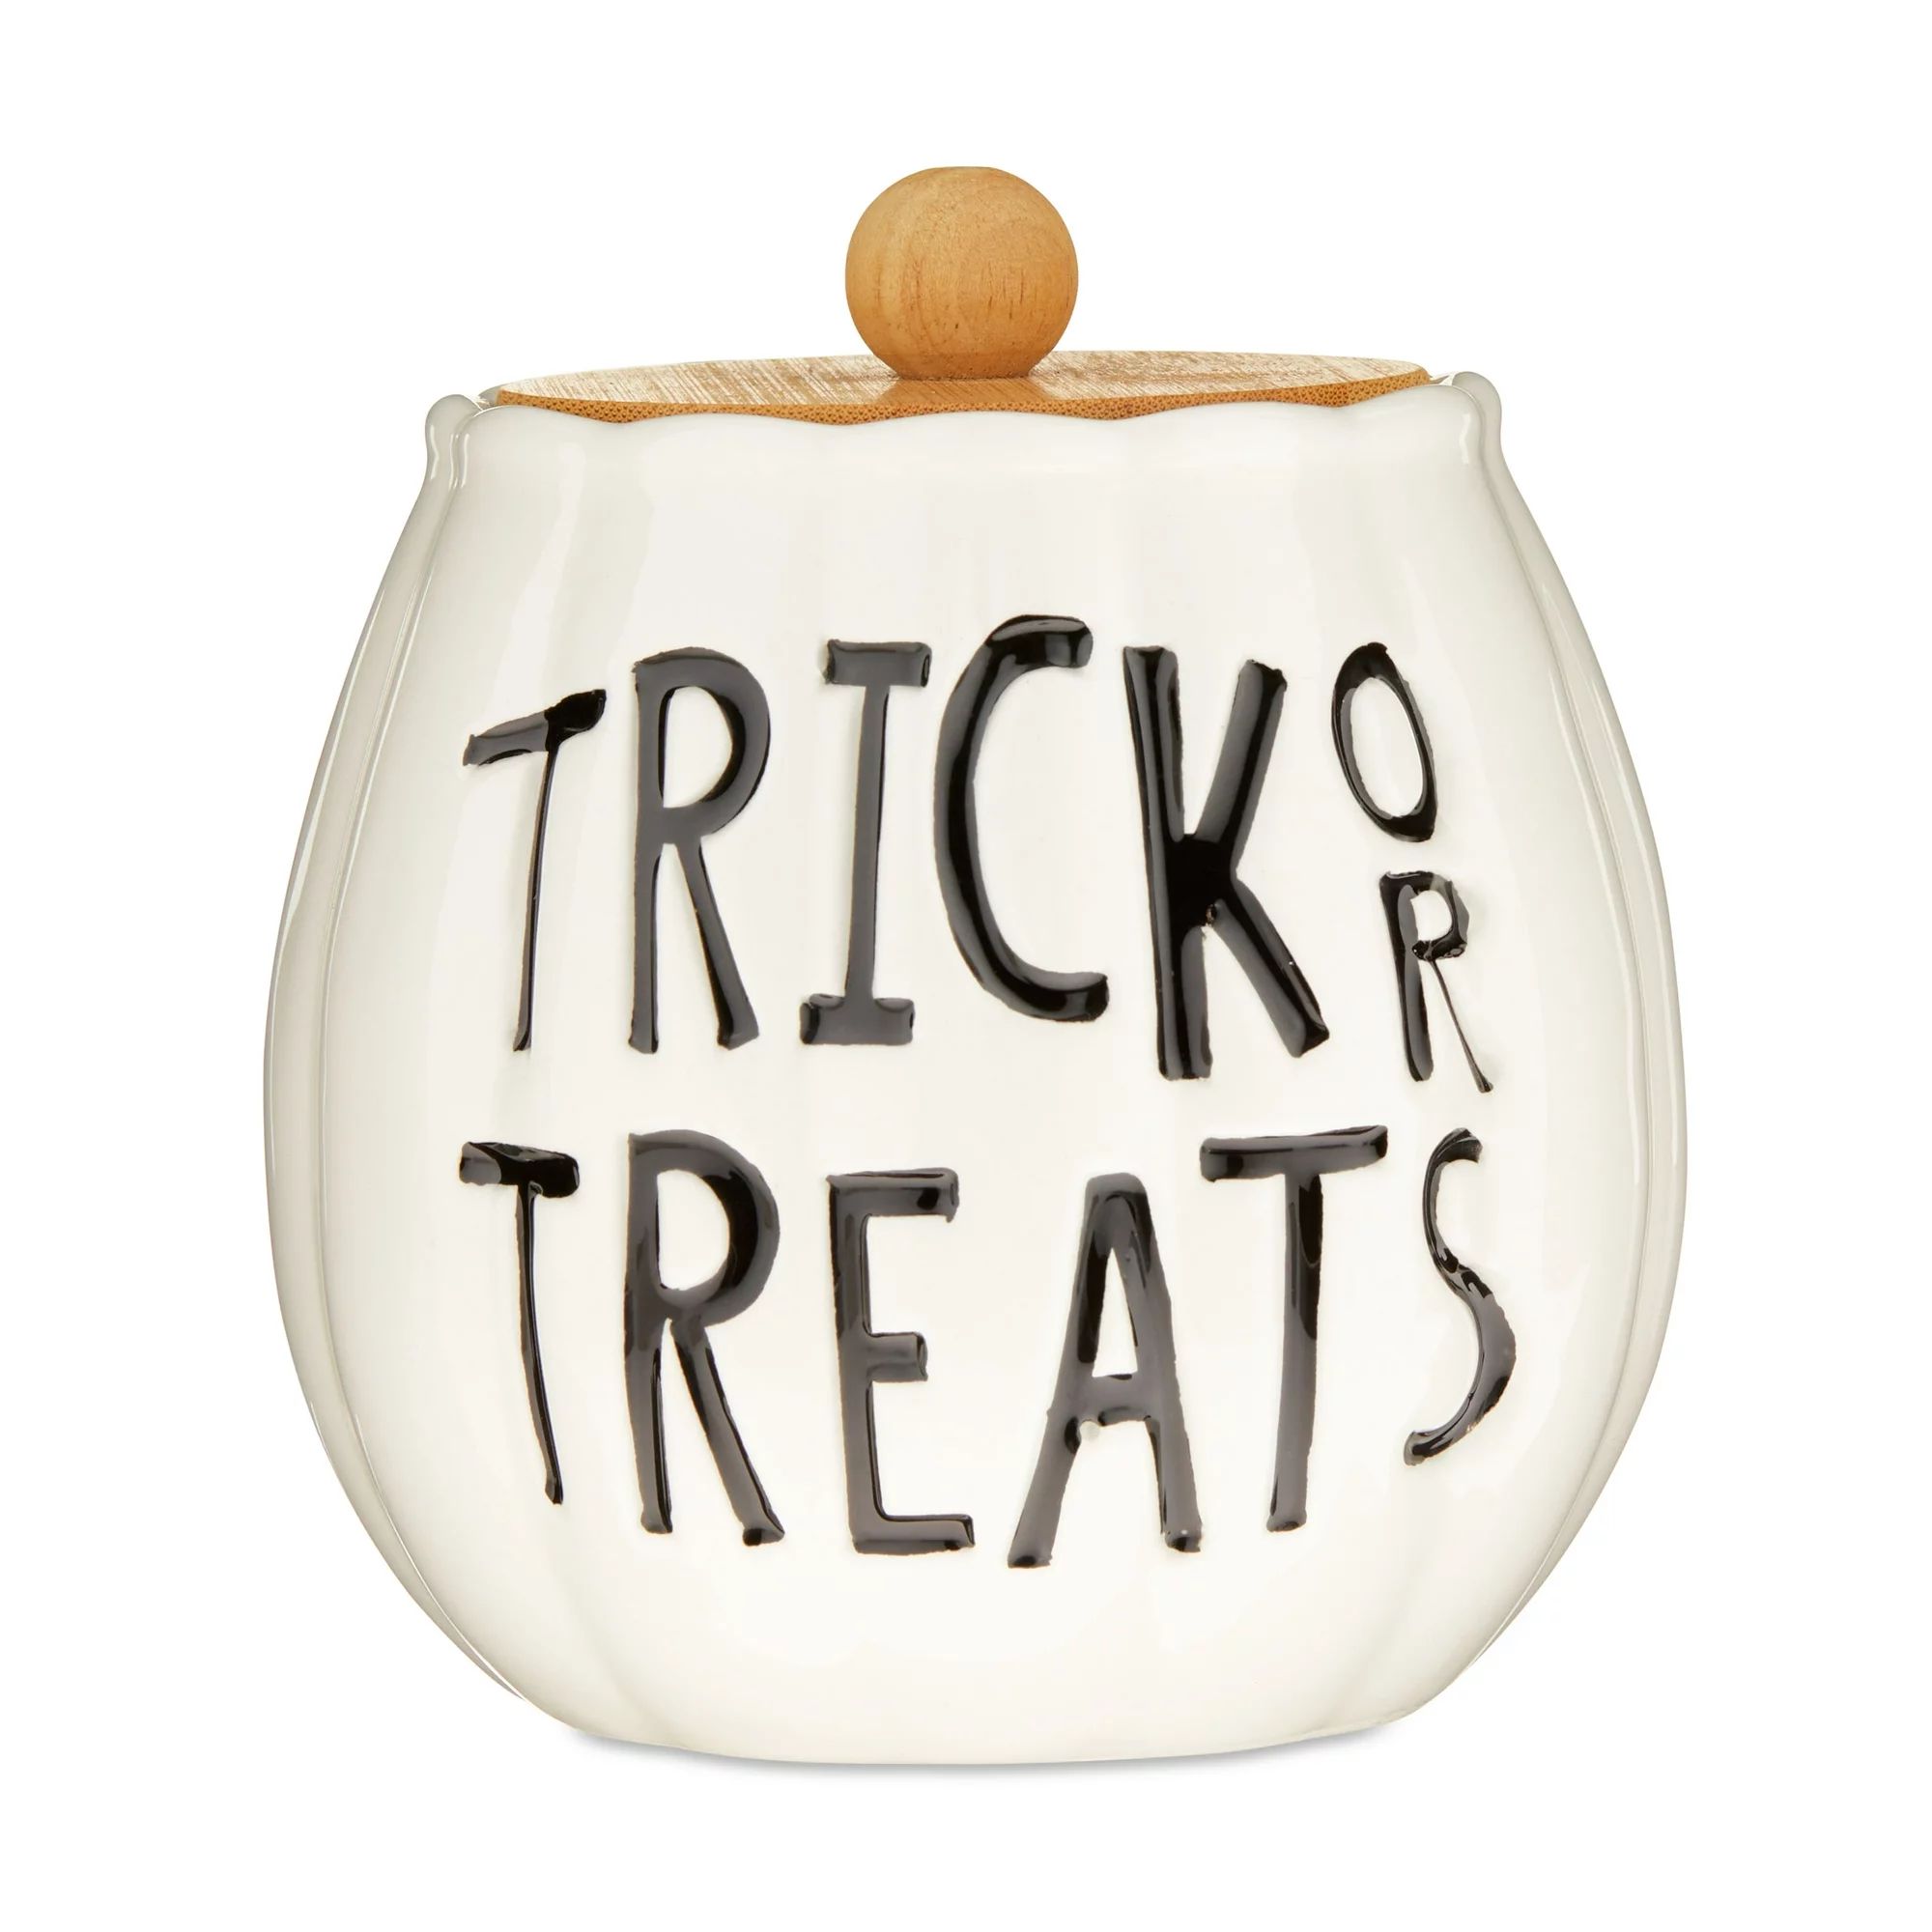 Halloween White Ceramic Trick or Treats Decorative Canister, 4.75", by Way to Celebrate | Walmart (US)